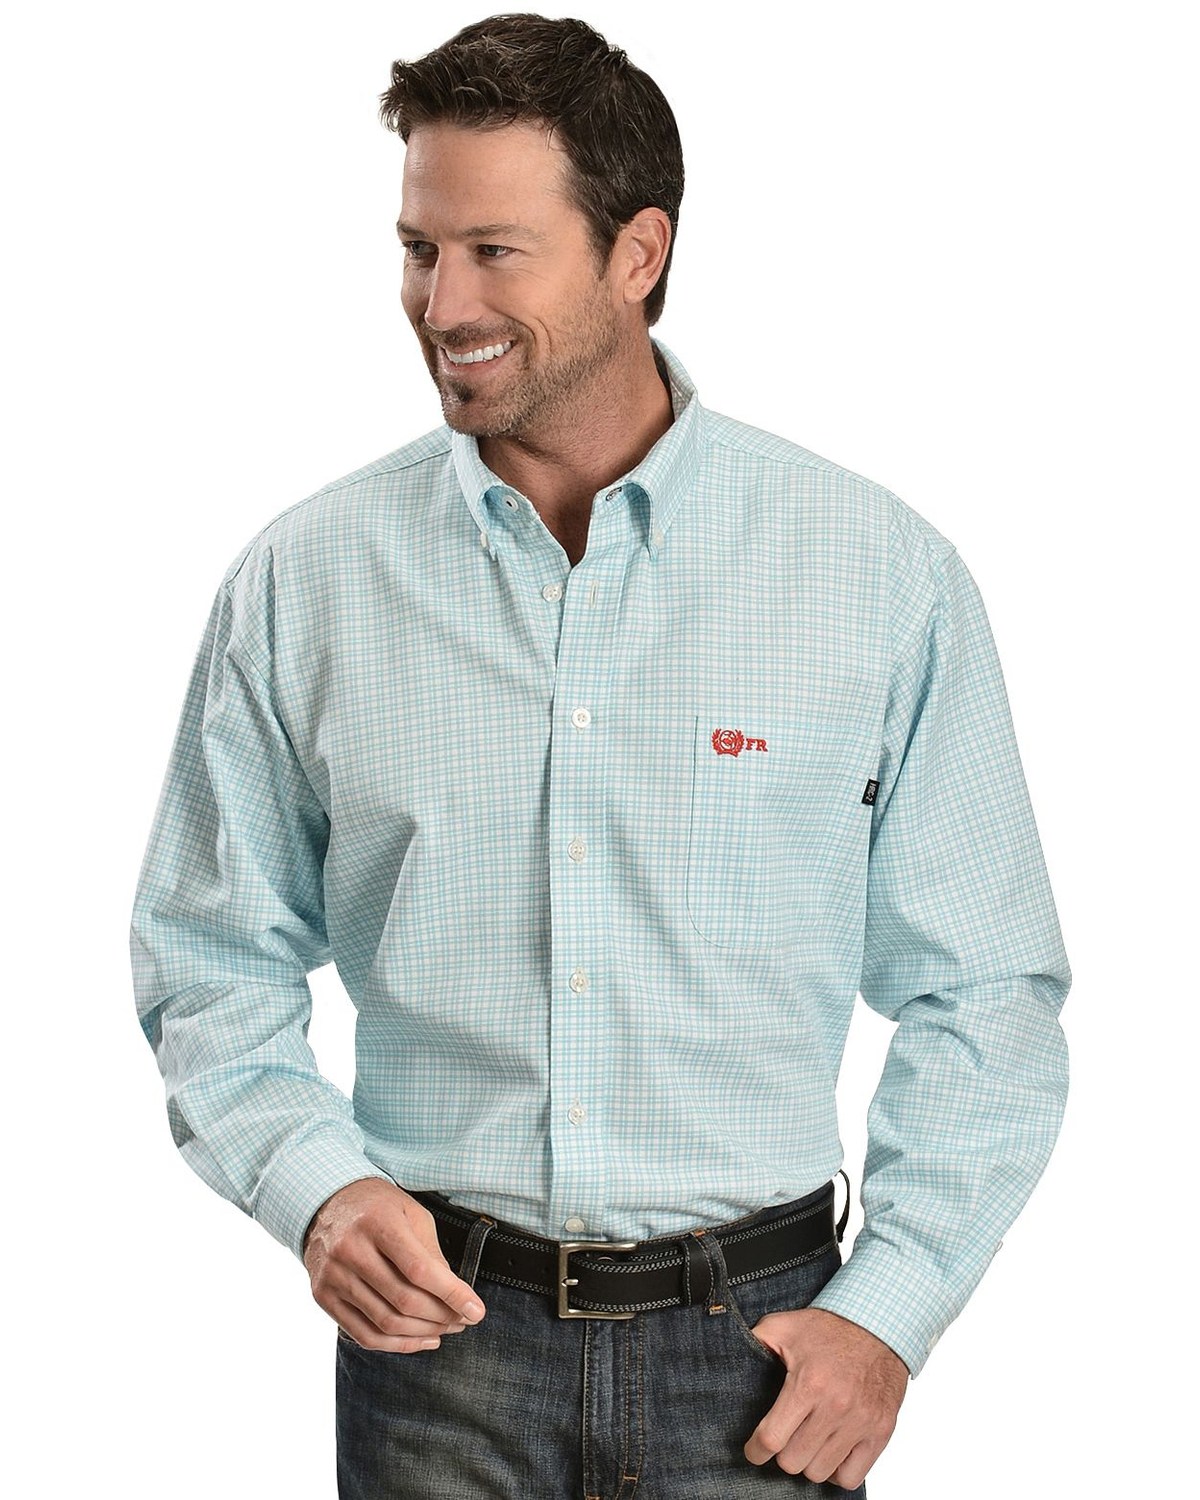 Cinch WRX Men's Flame Resistant Long Sleeve Checkered Twill Work Shirt